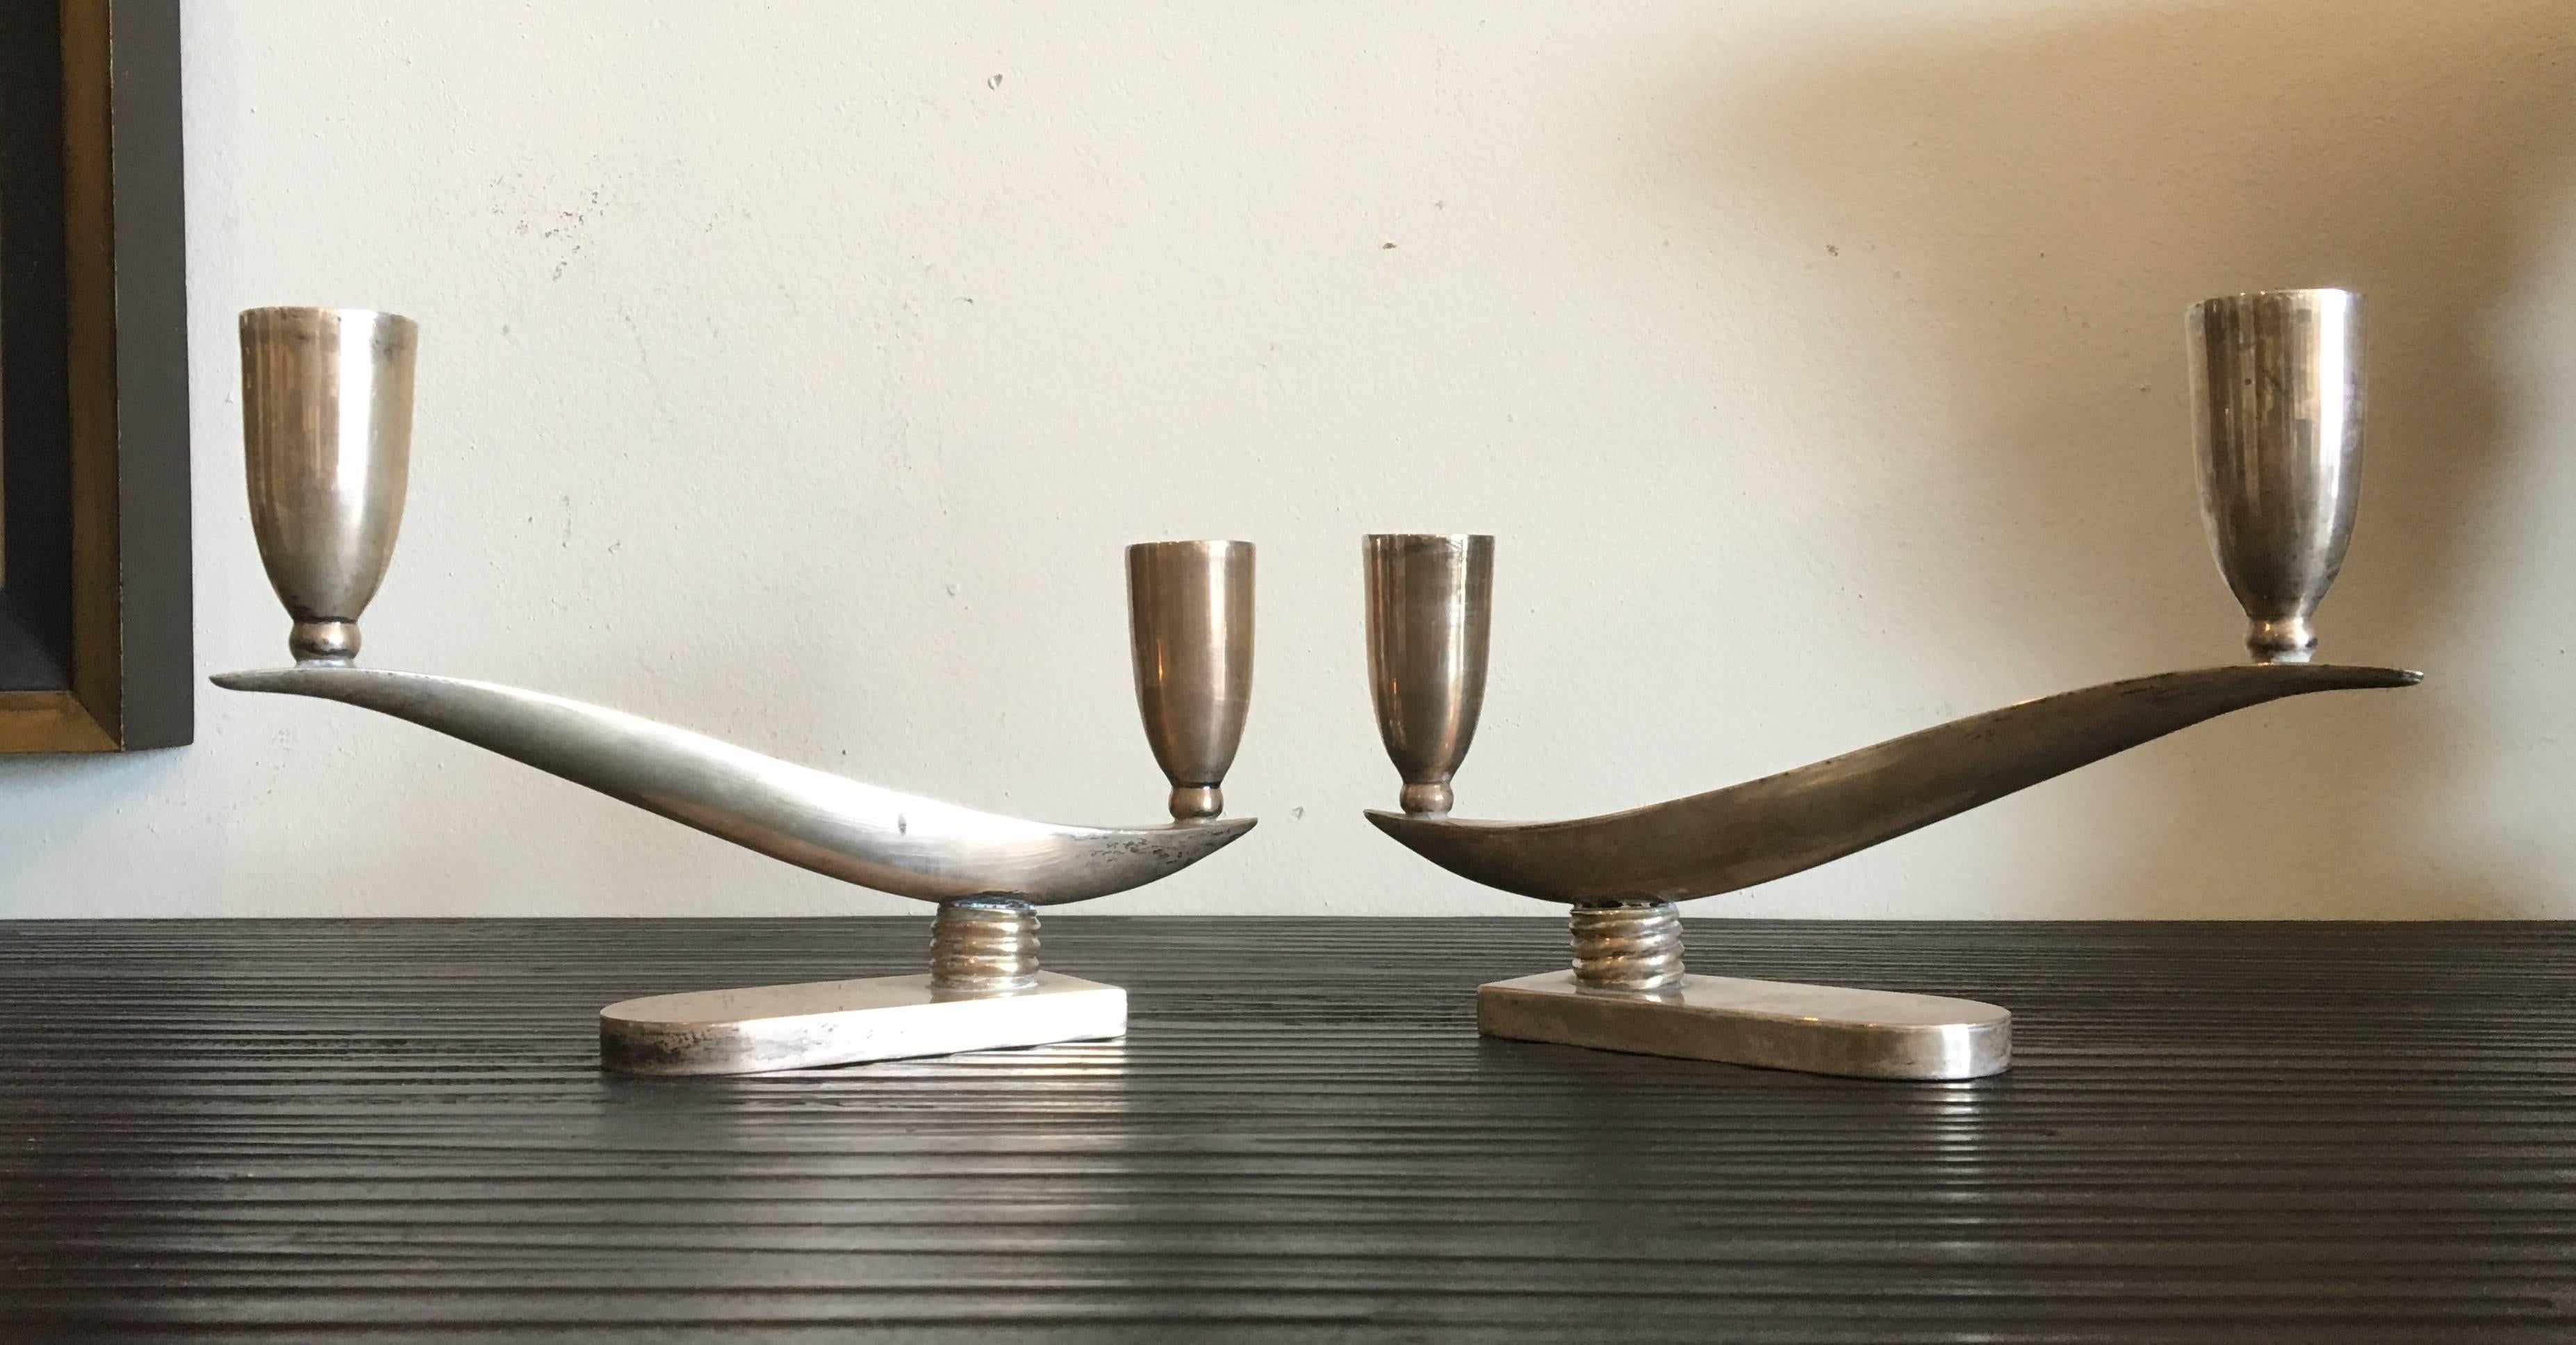 A beautiful pair of vintage Mexican sterling silver modernist candleholders. The measurement of each candleholder is 9 1/4